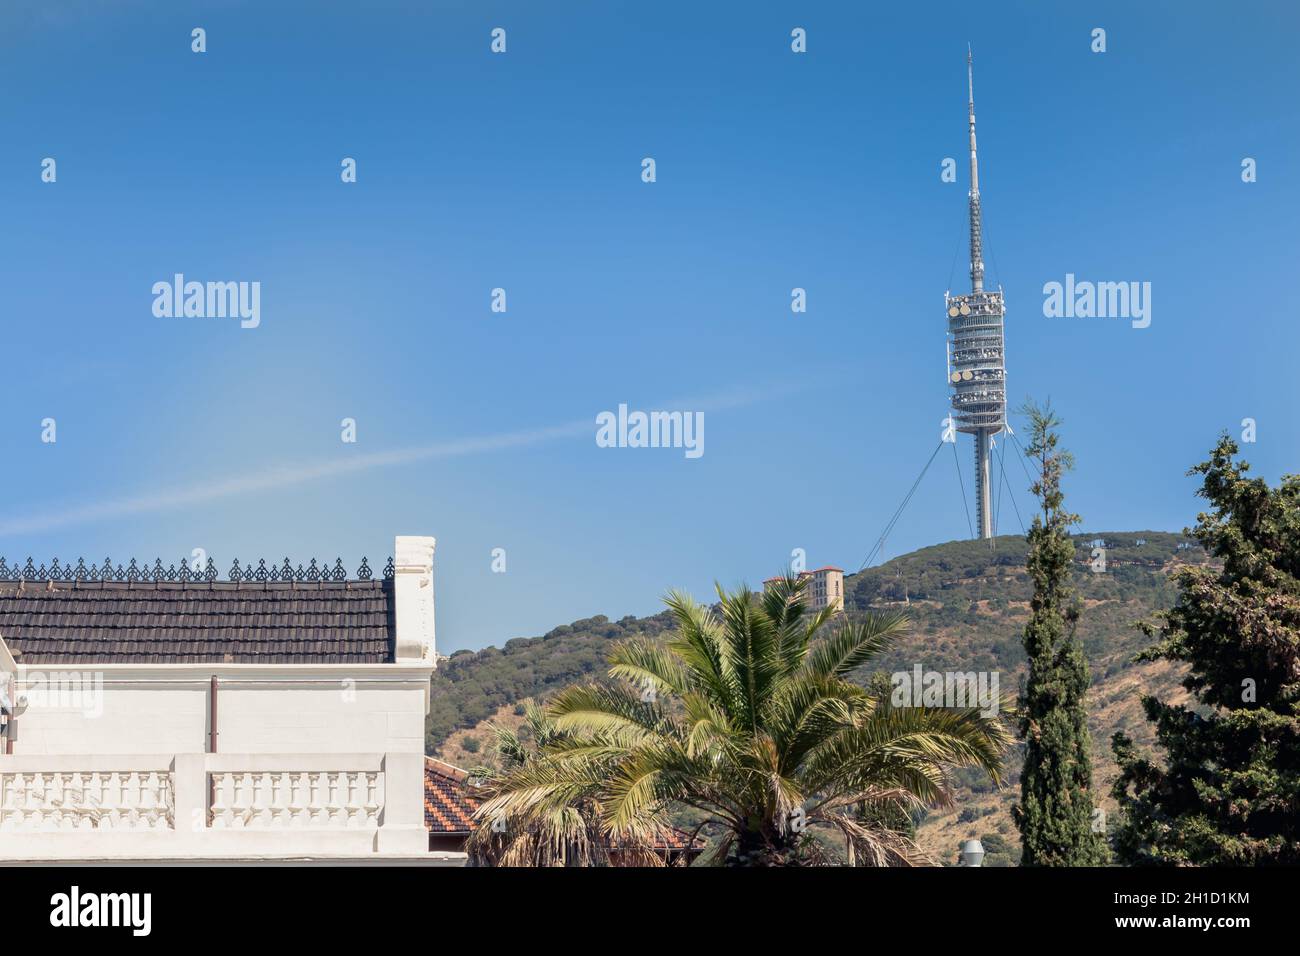 Barcelona, Spain - June 20, 2017: on the heights of Barcelona, the Tower of Collserola (Torre de Collserola), a communication tower of the British arc Stock Photo